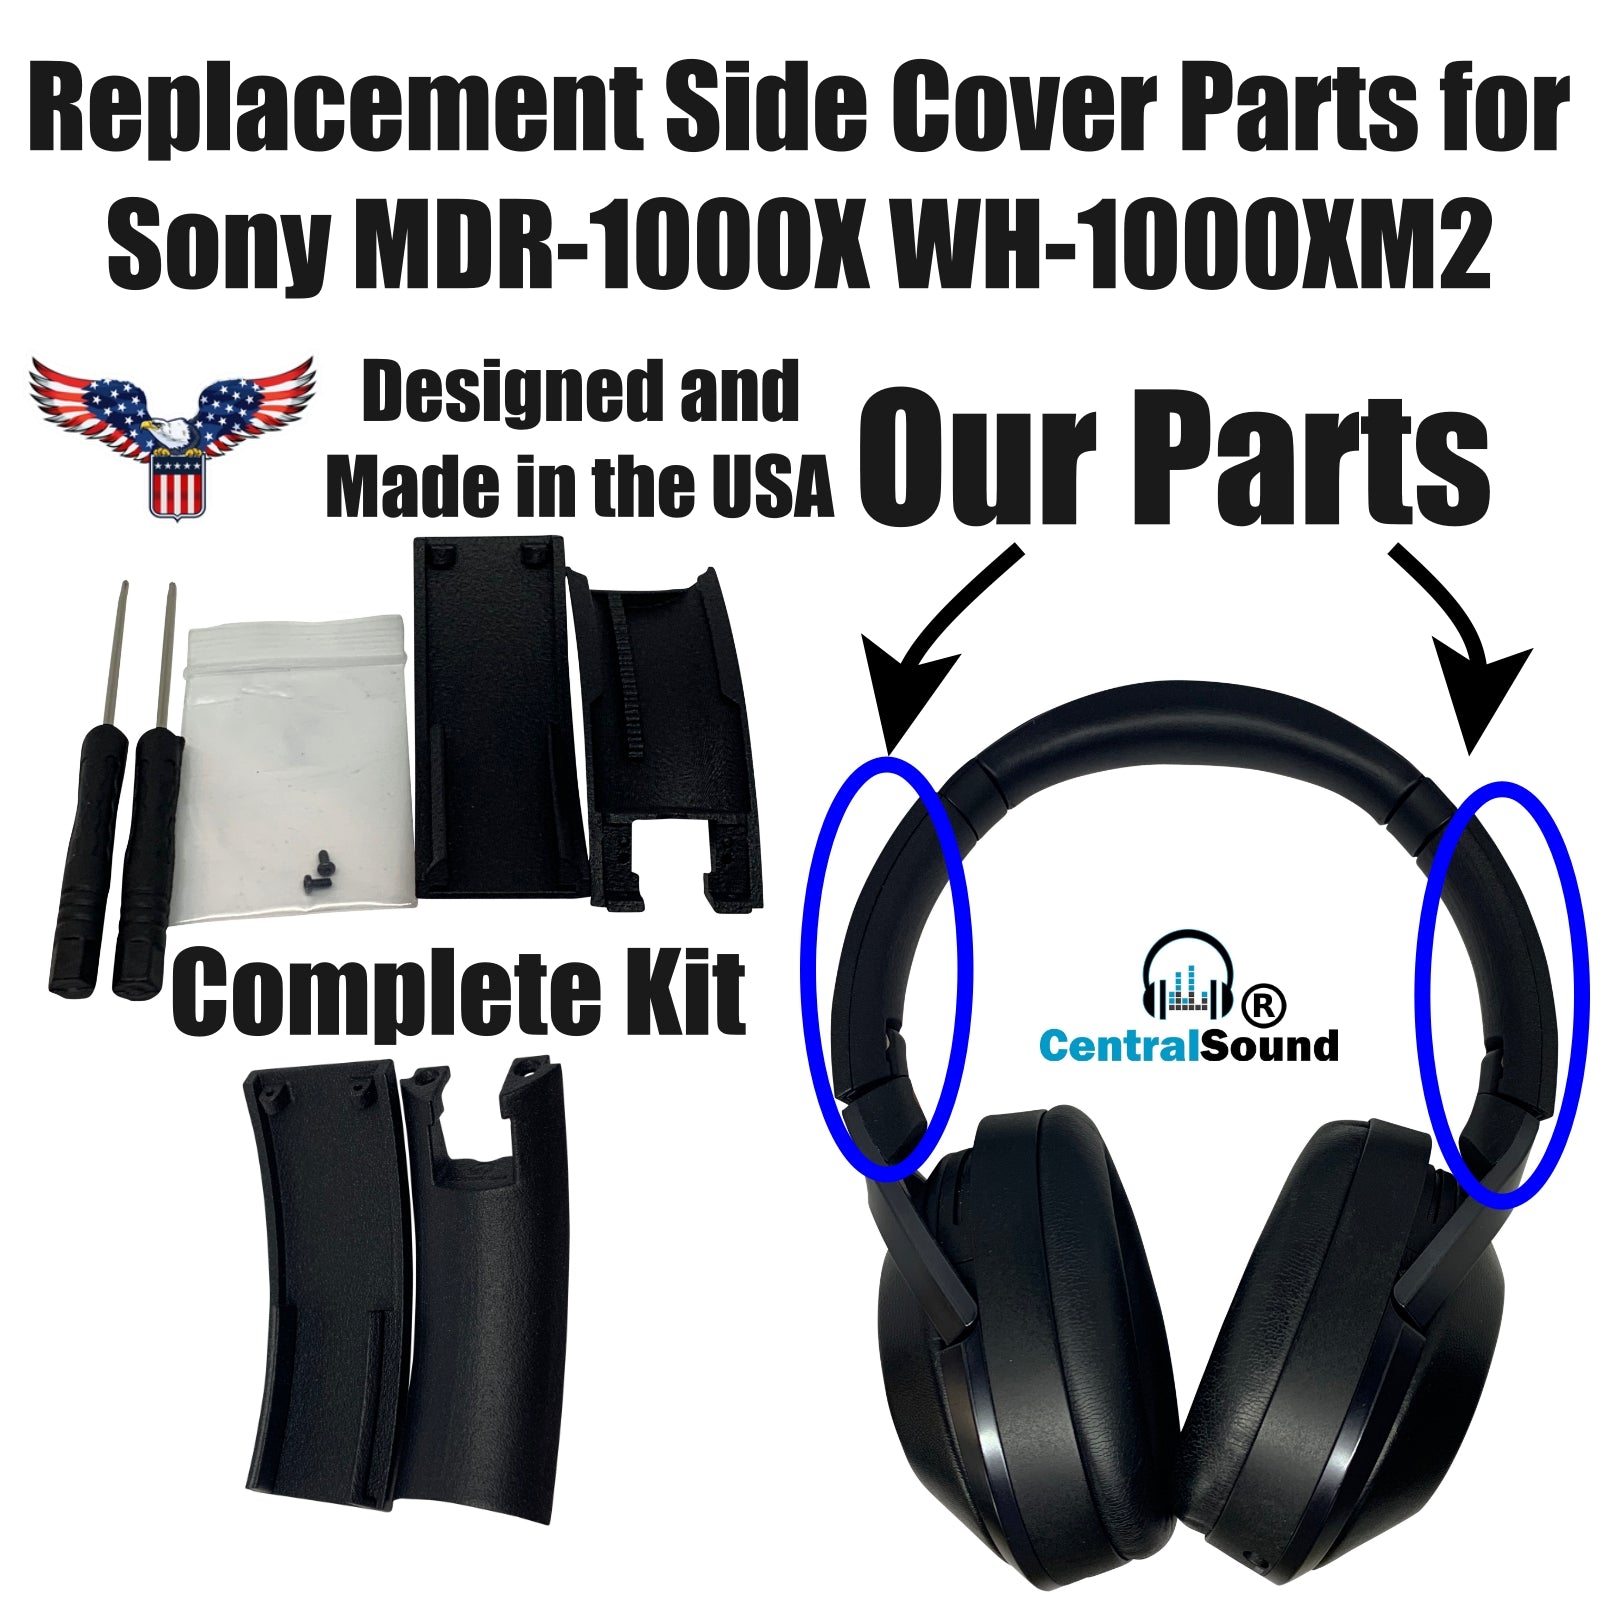 Replacement Side Cover Slider Part UPGRADE KIT for Sony MDR-1000X WH-1000XM2 Headphones - CentralSound